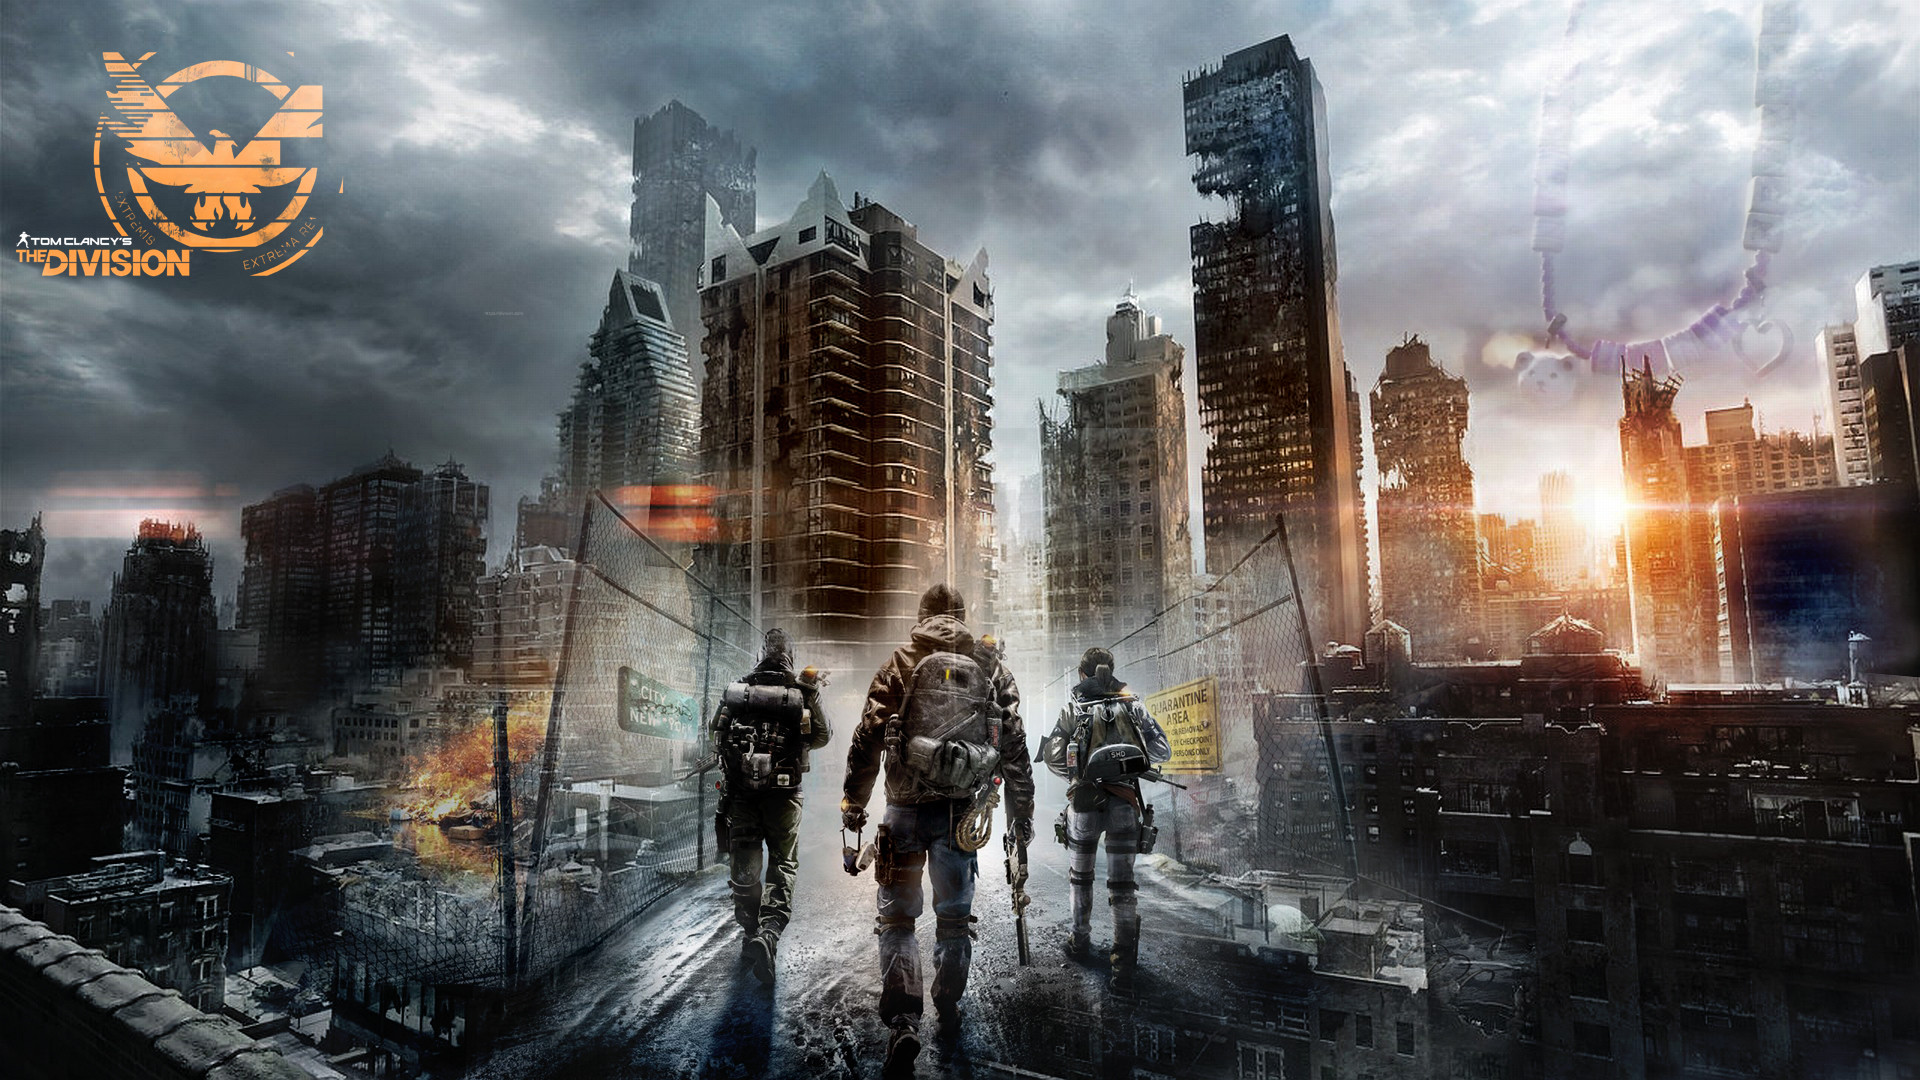 1920x1080 The Division Wallpaper by Germanwallpaper The Division Wallpaper by  Germanwallpaper